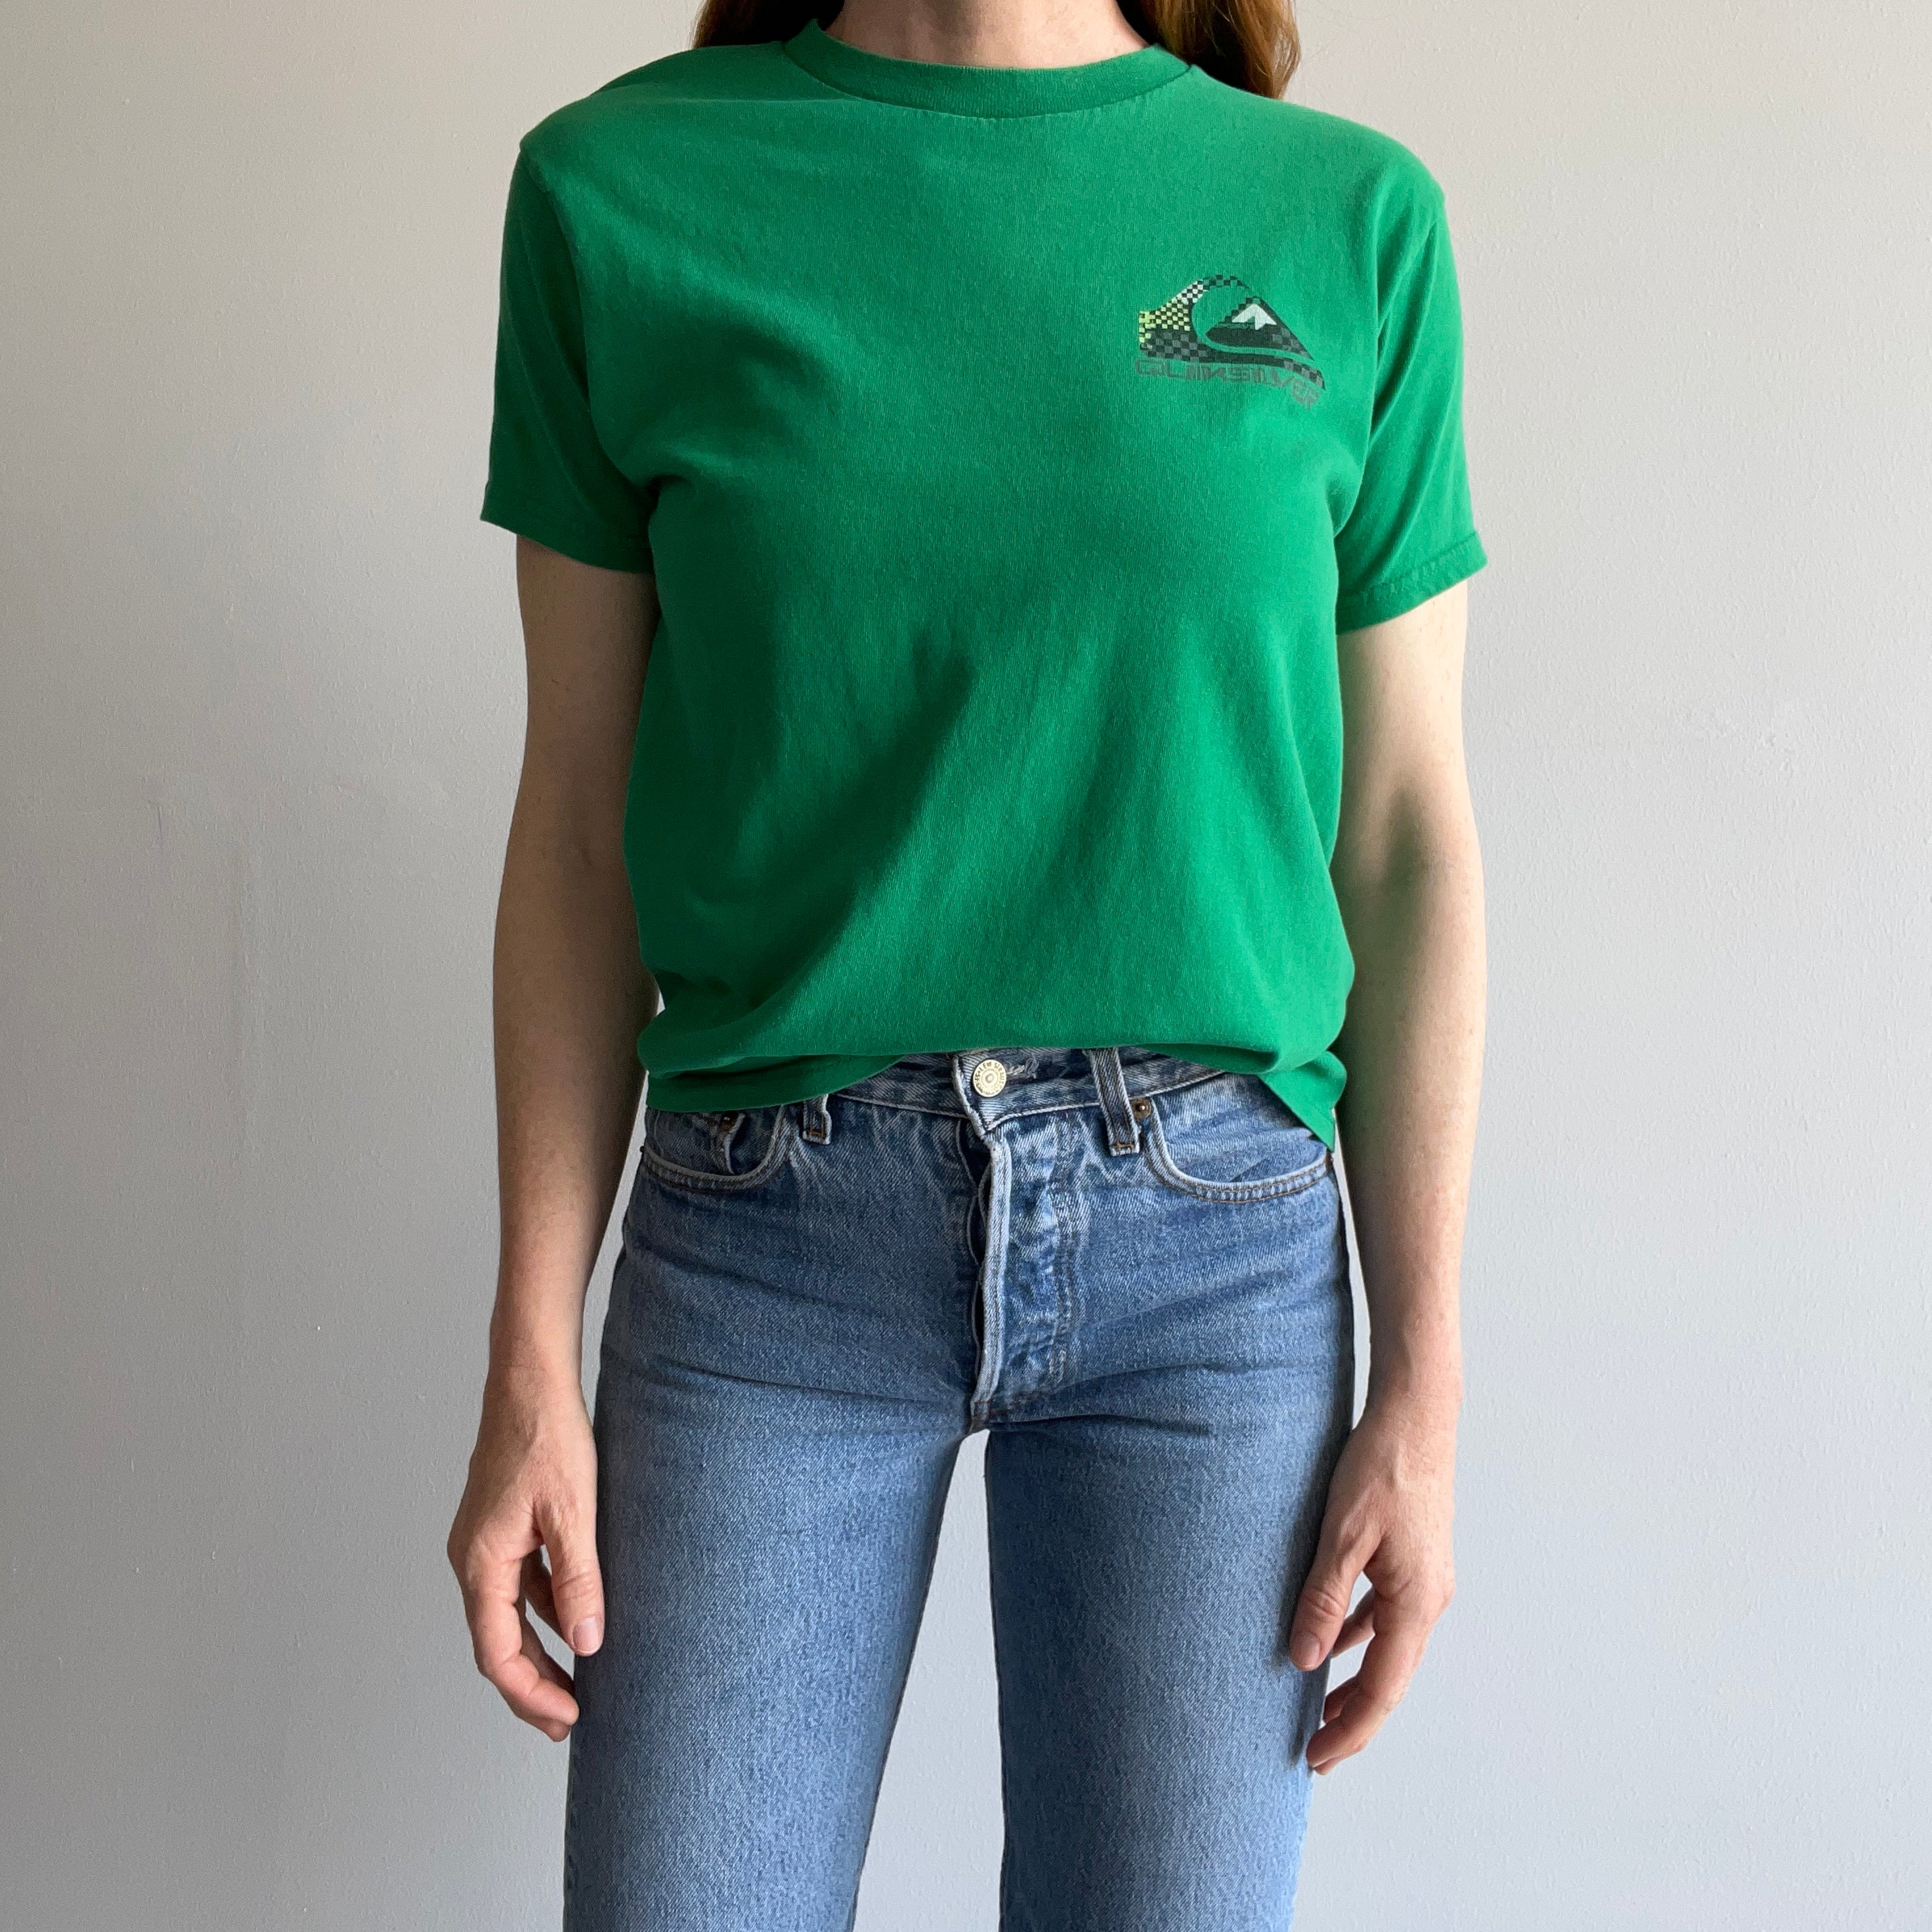 1990s Smaller Quicksilver Front and Back T-Shirt - Surfwear